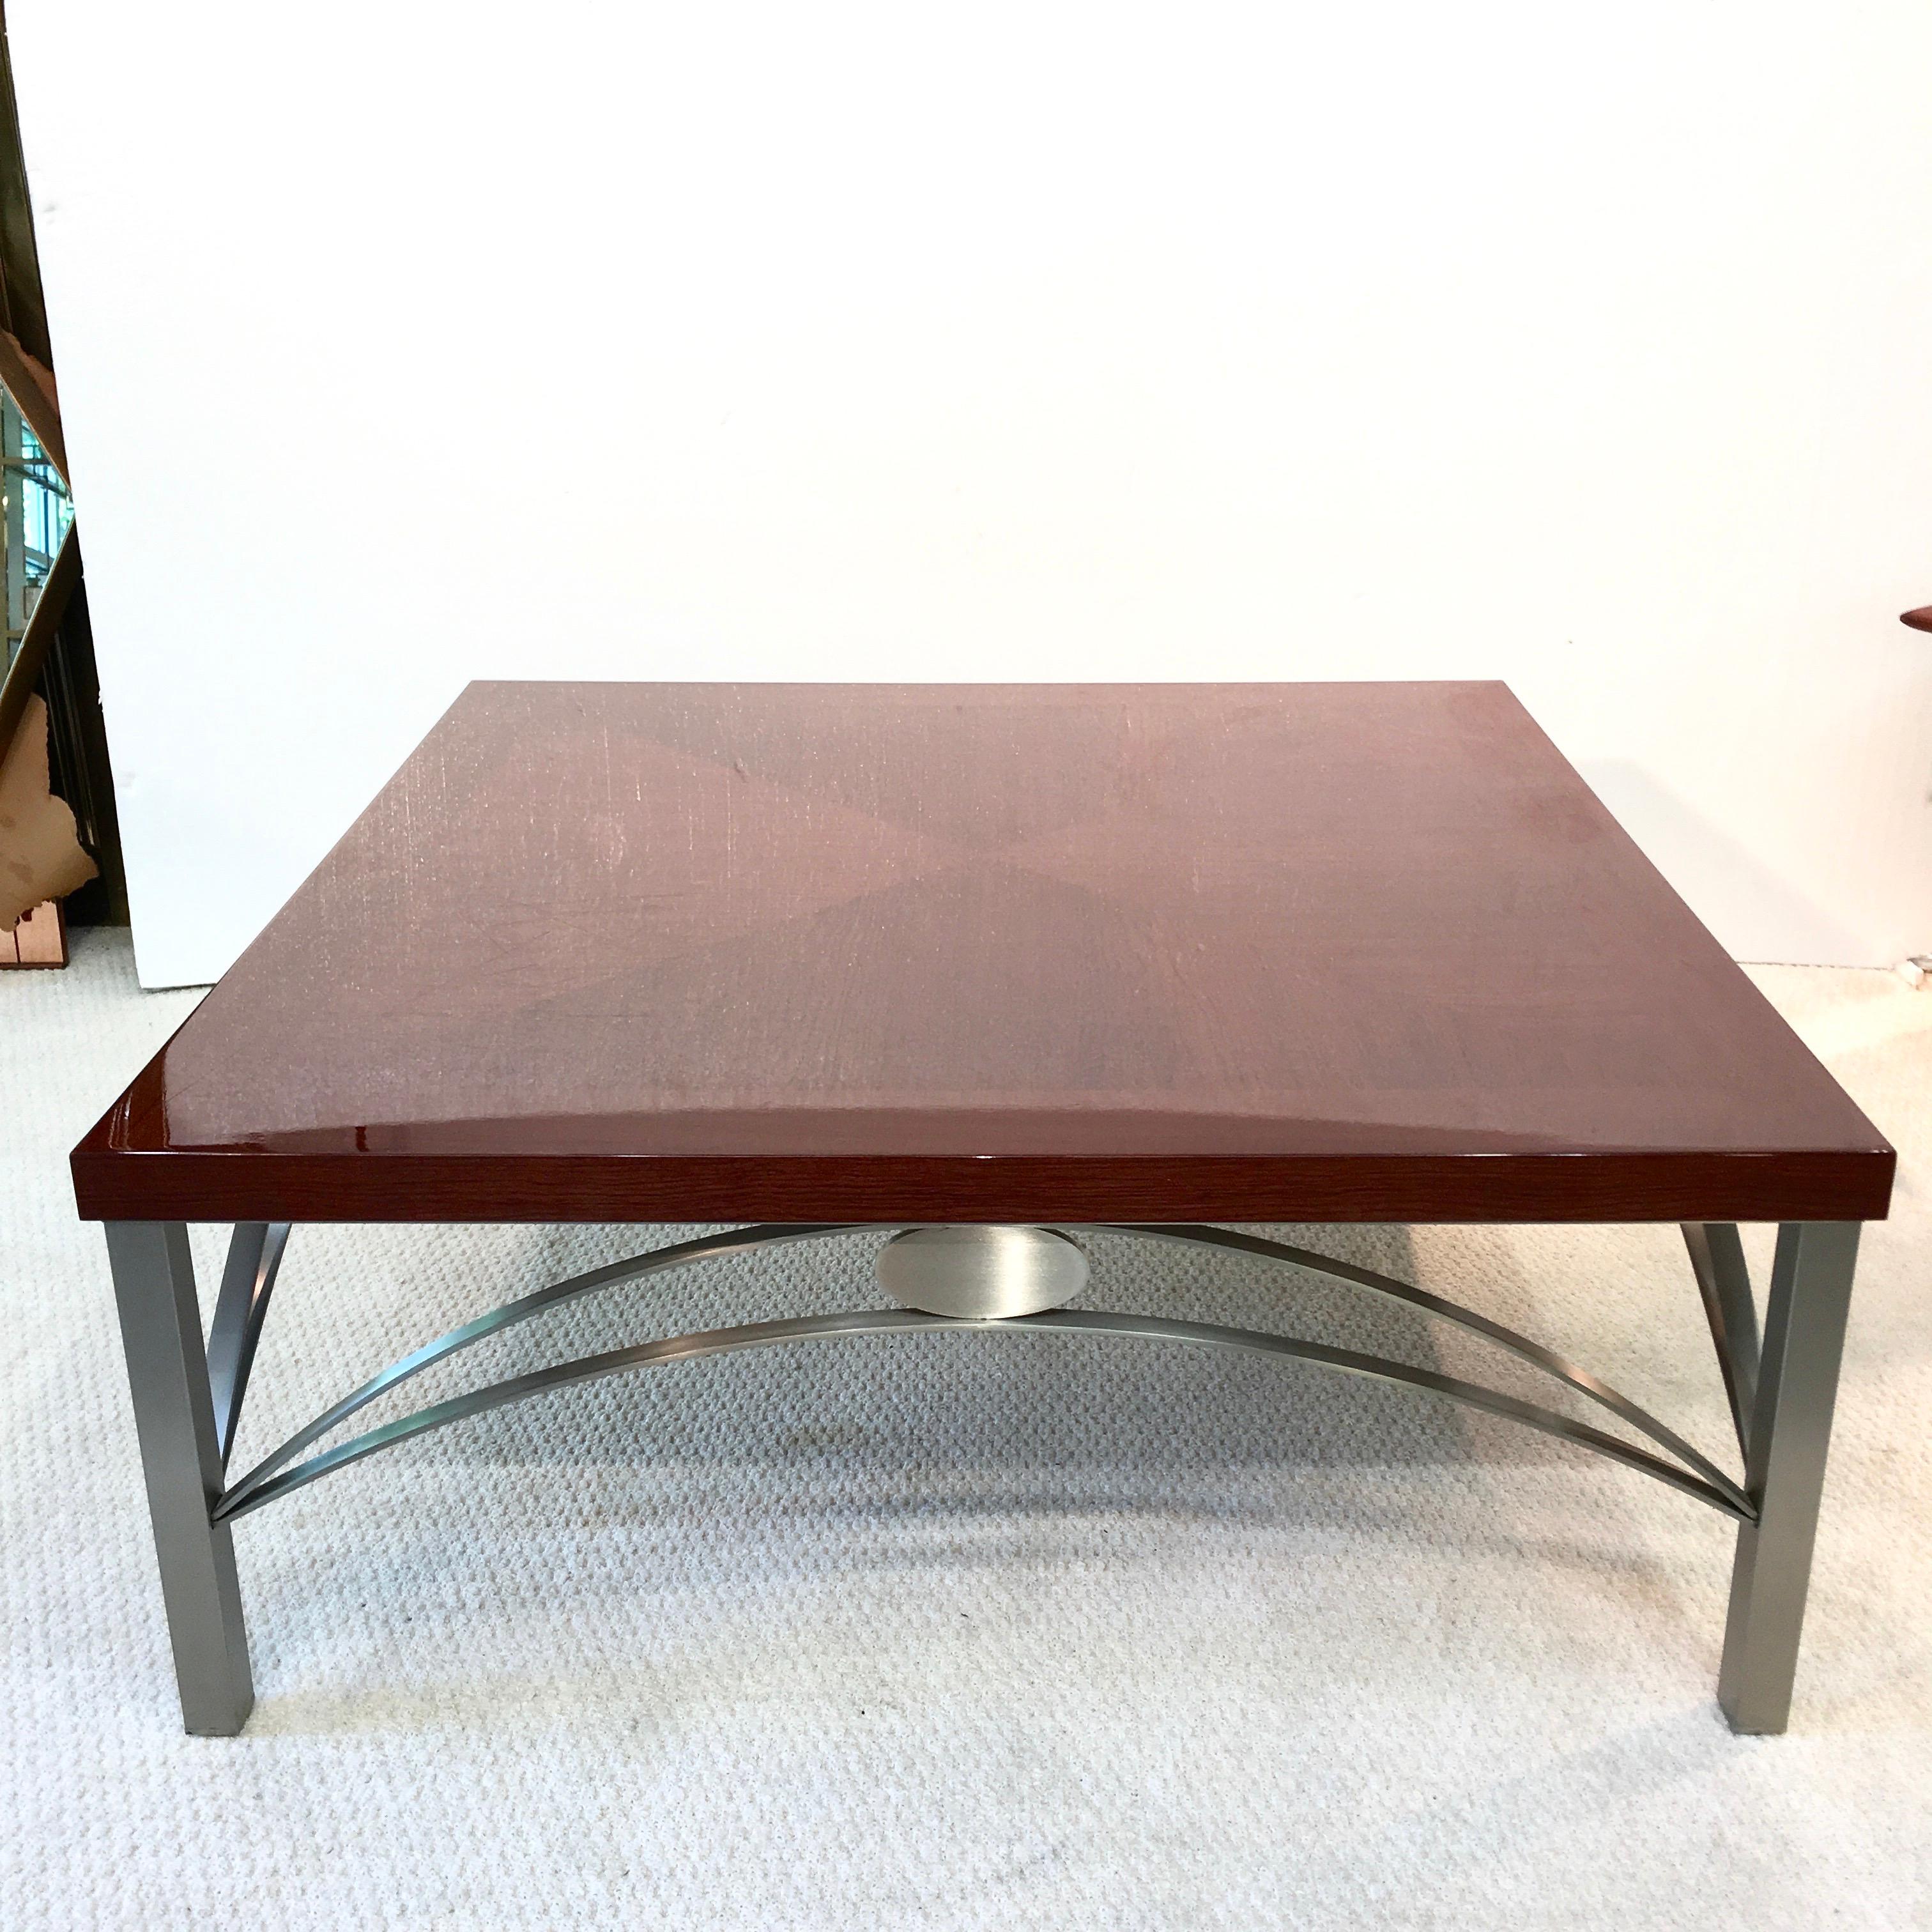 Late 20th Century Designer Square Cocktail Table Padauk and Stainless Steel For Sale